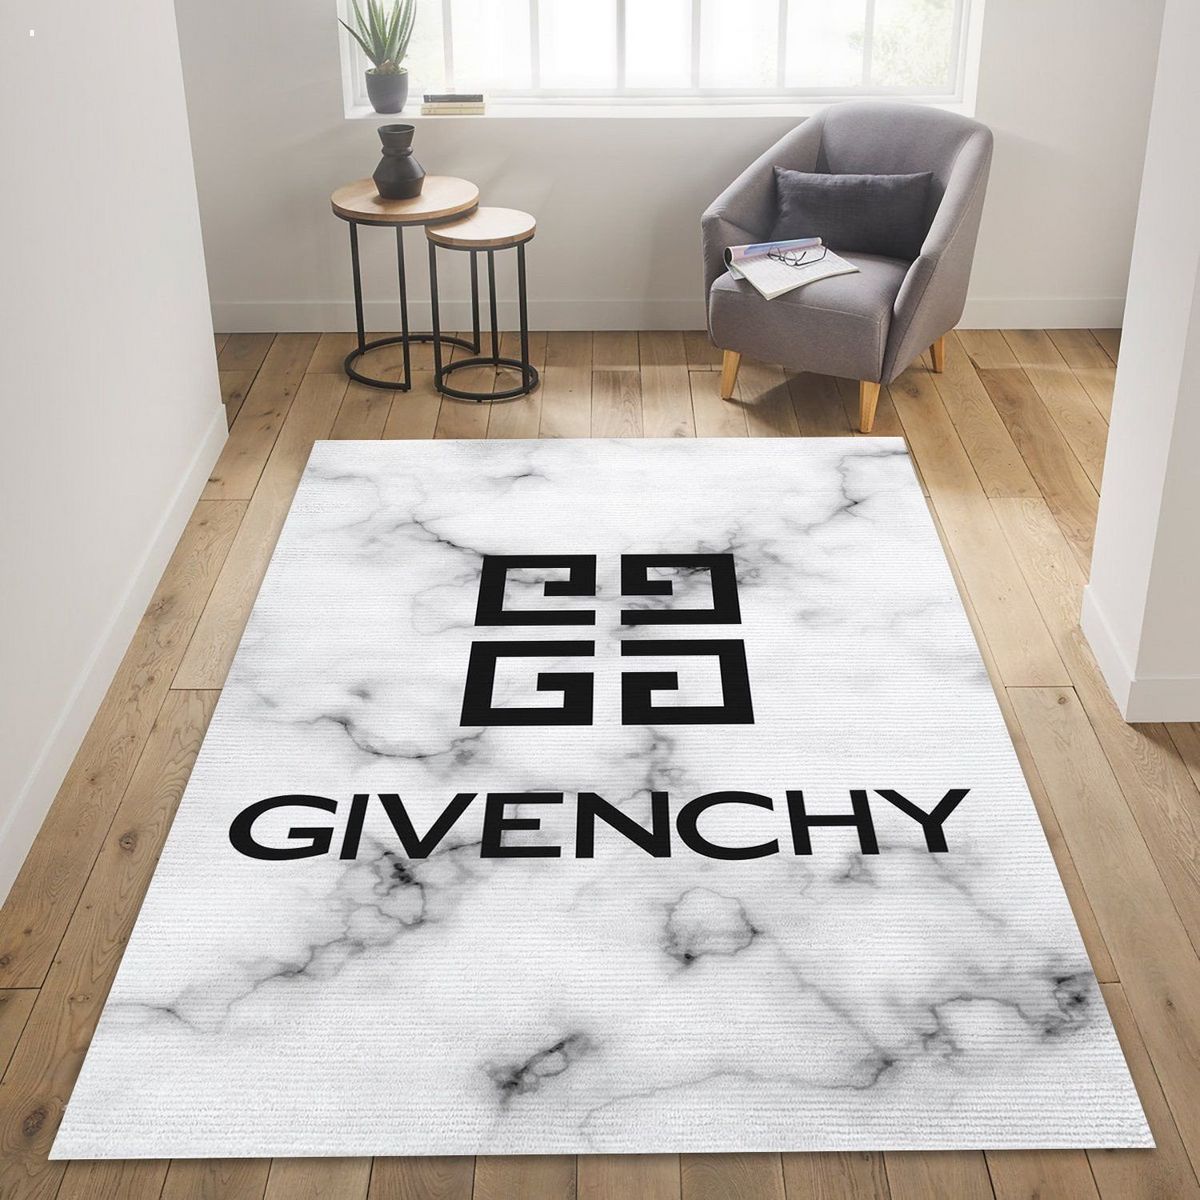 Givenchy White Color Luxury Brand Carpet Rug Limited Edition